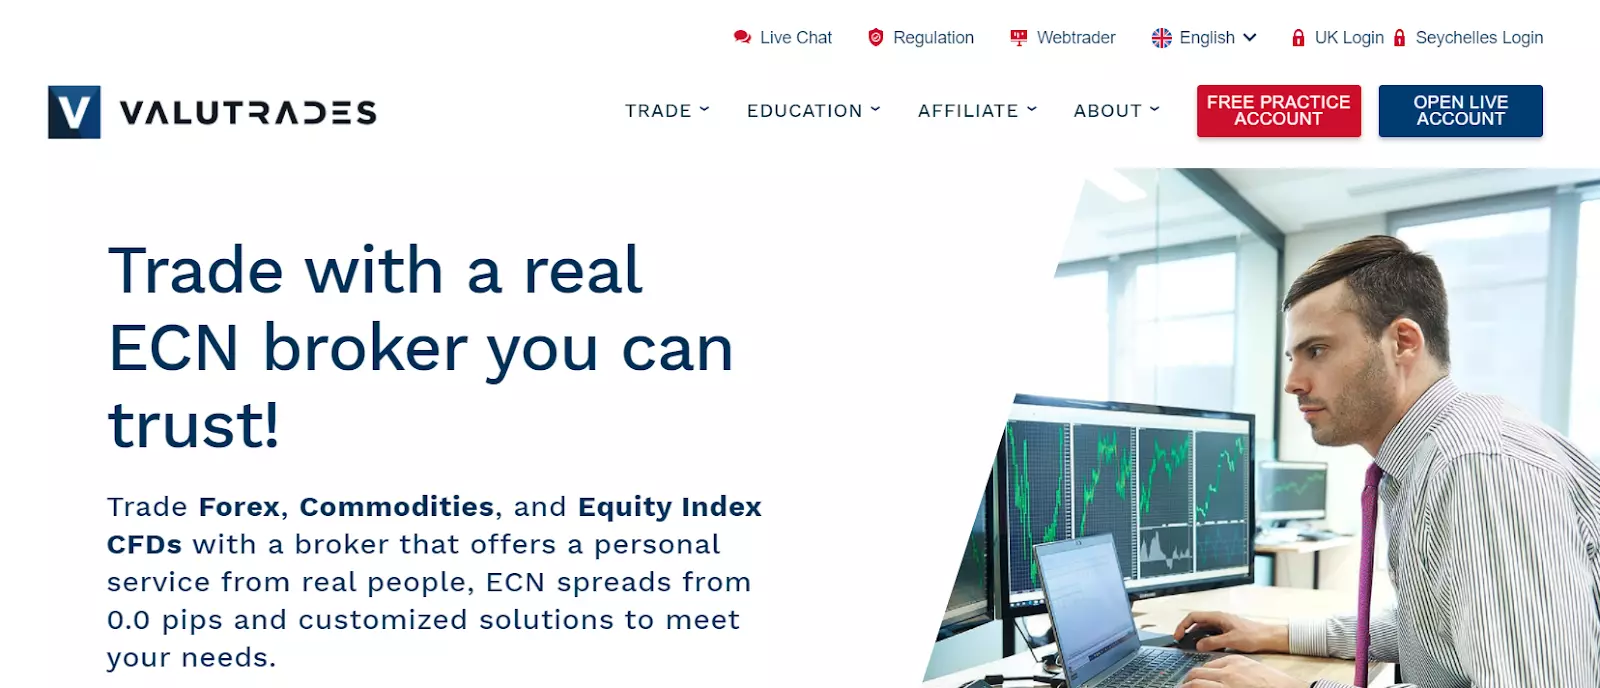 Valutrades Review – Open Account